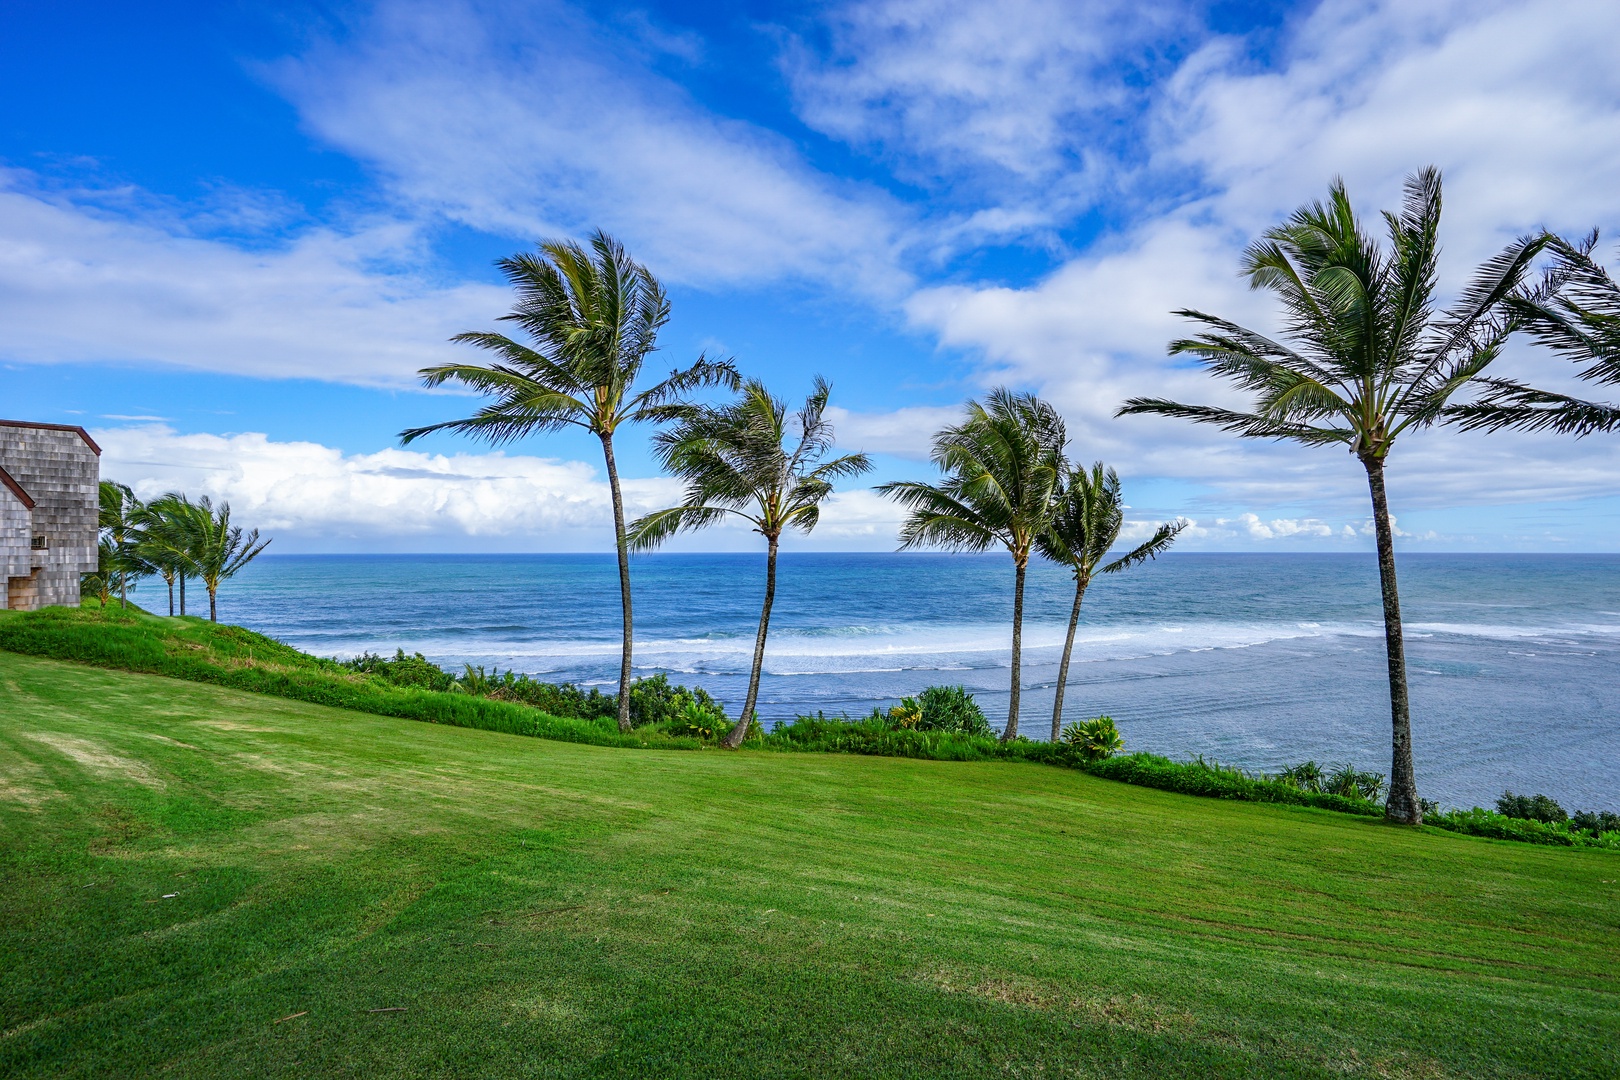 Princeville Vacation Rentals, Sealodge Villa H5 - Relaxing views of the waves rolling in